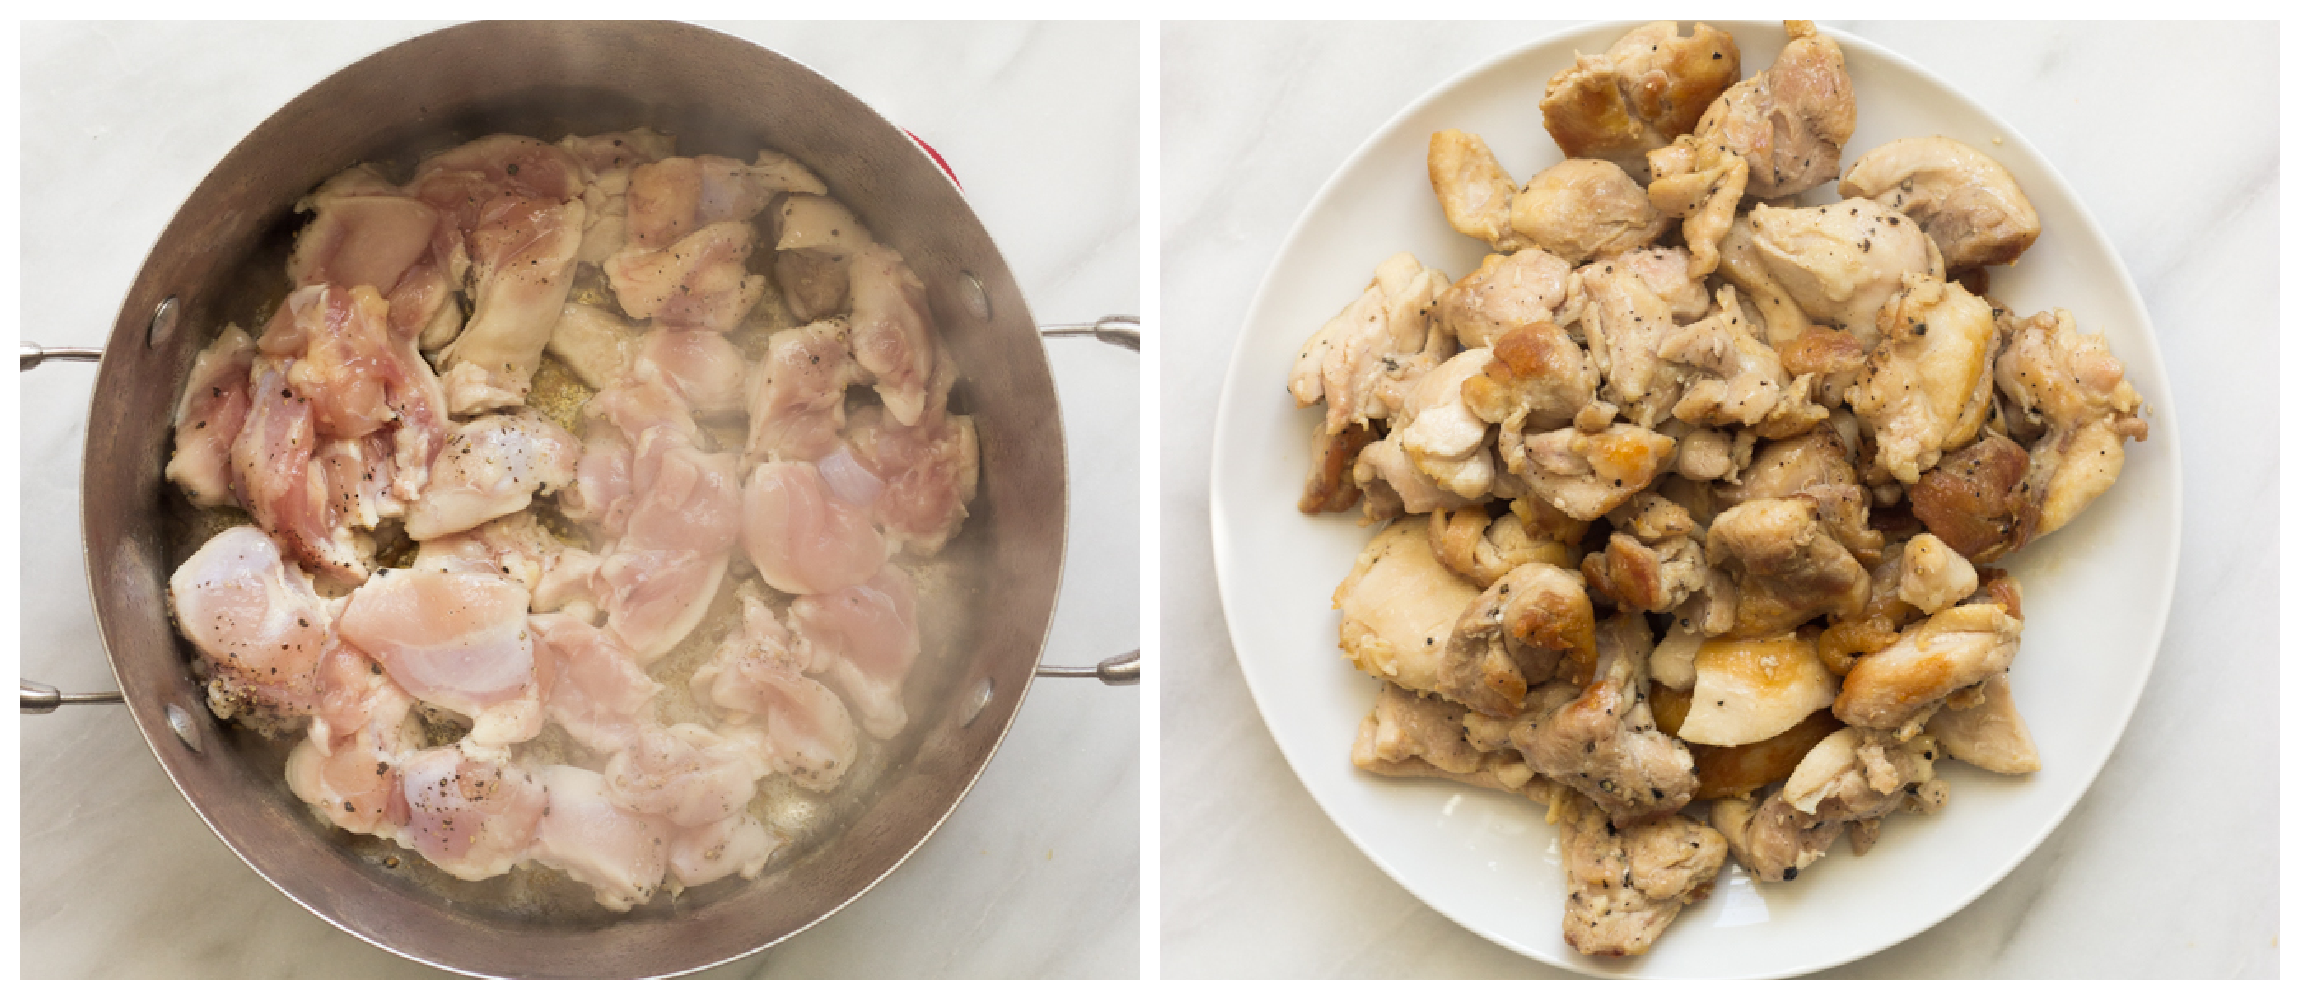 two photos, one showing raw chicken pieces in a dutch oven, and cooked chicken pieces on a plate in second.